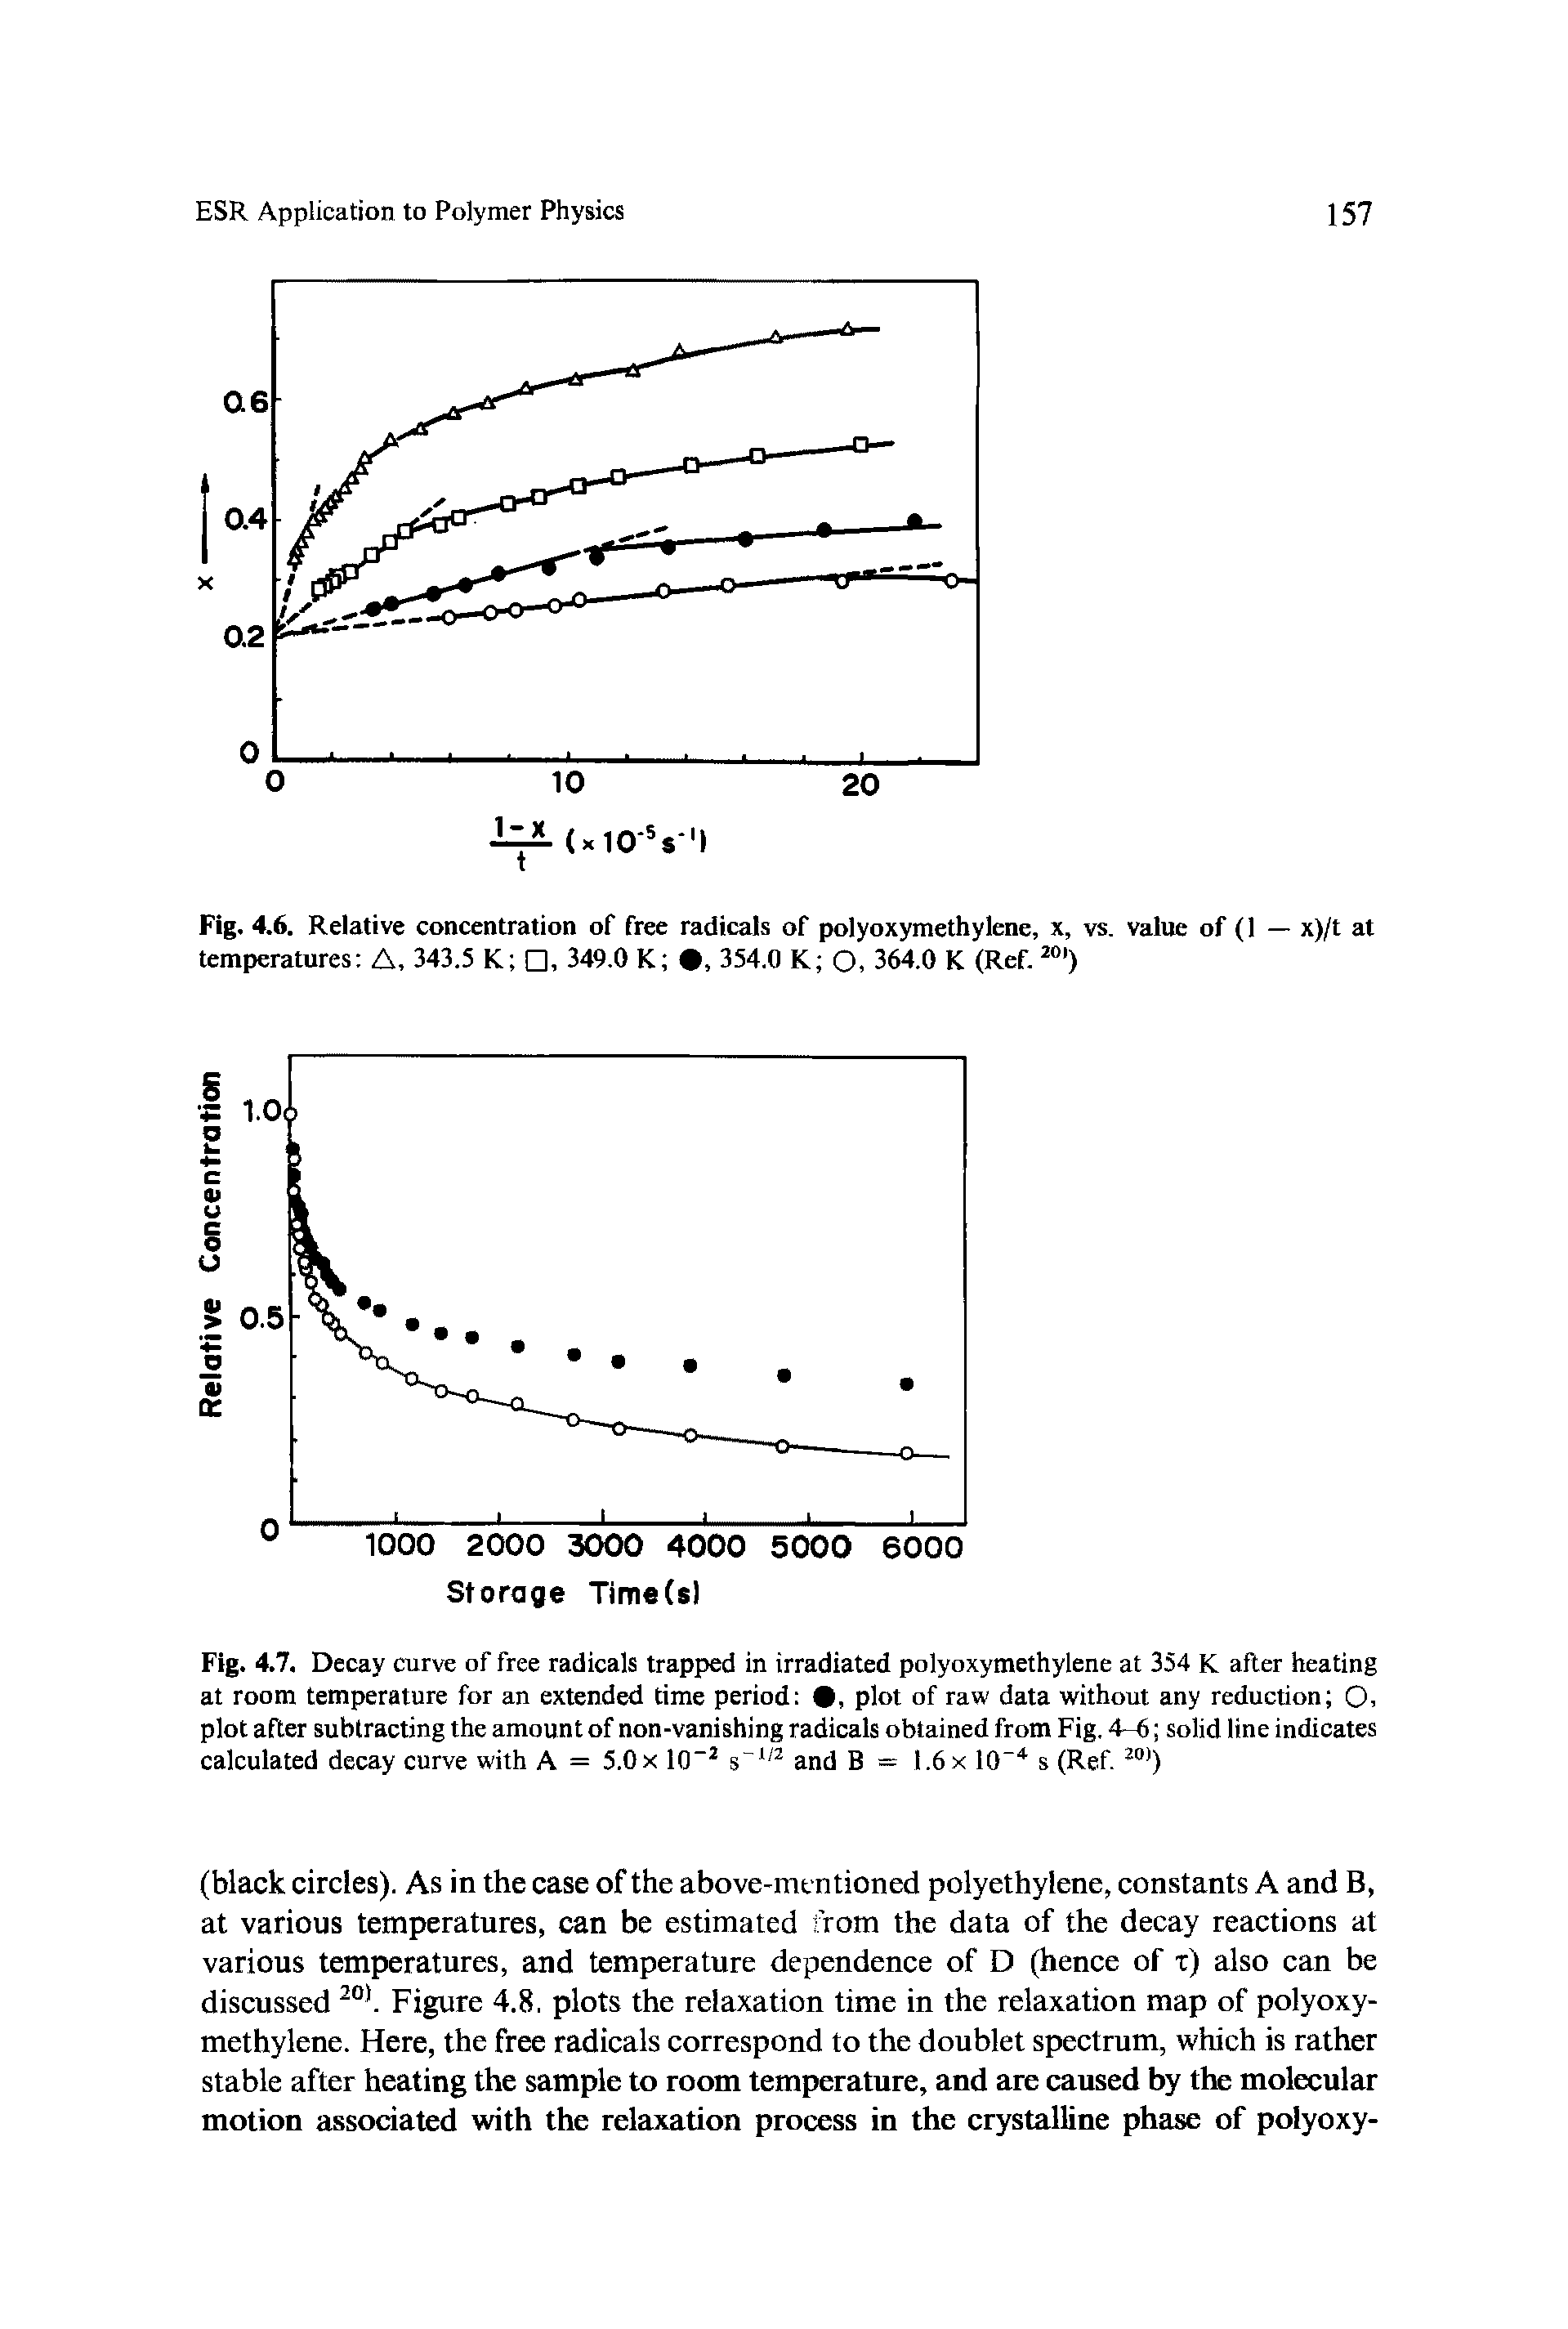 Fig. 4.7. Decay curve of free radicals trapped in irradiated polyoxymethylene at 354 K after heating at room temperature for an extended time period , plot of raw data without any reduction O. plot after subtracting the amount of non-vanishing radicals obtained from Fig. 4-6 solid line indicates calculated decay curve with A = 5.0x 10 s" and B = 1.6x 10" s (Ref.